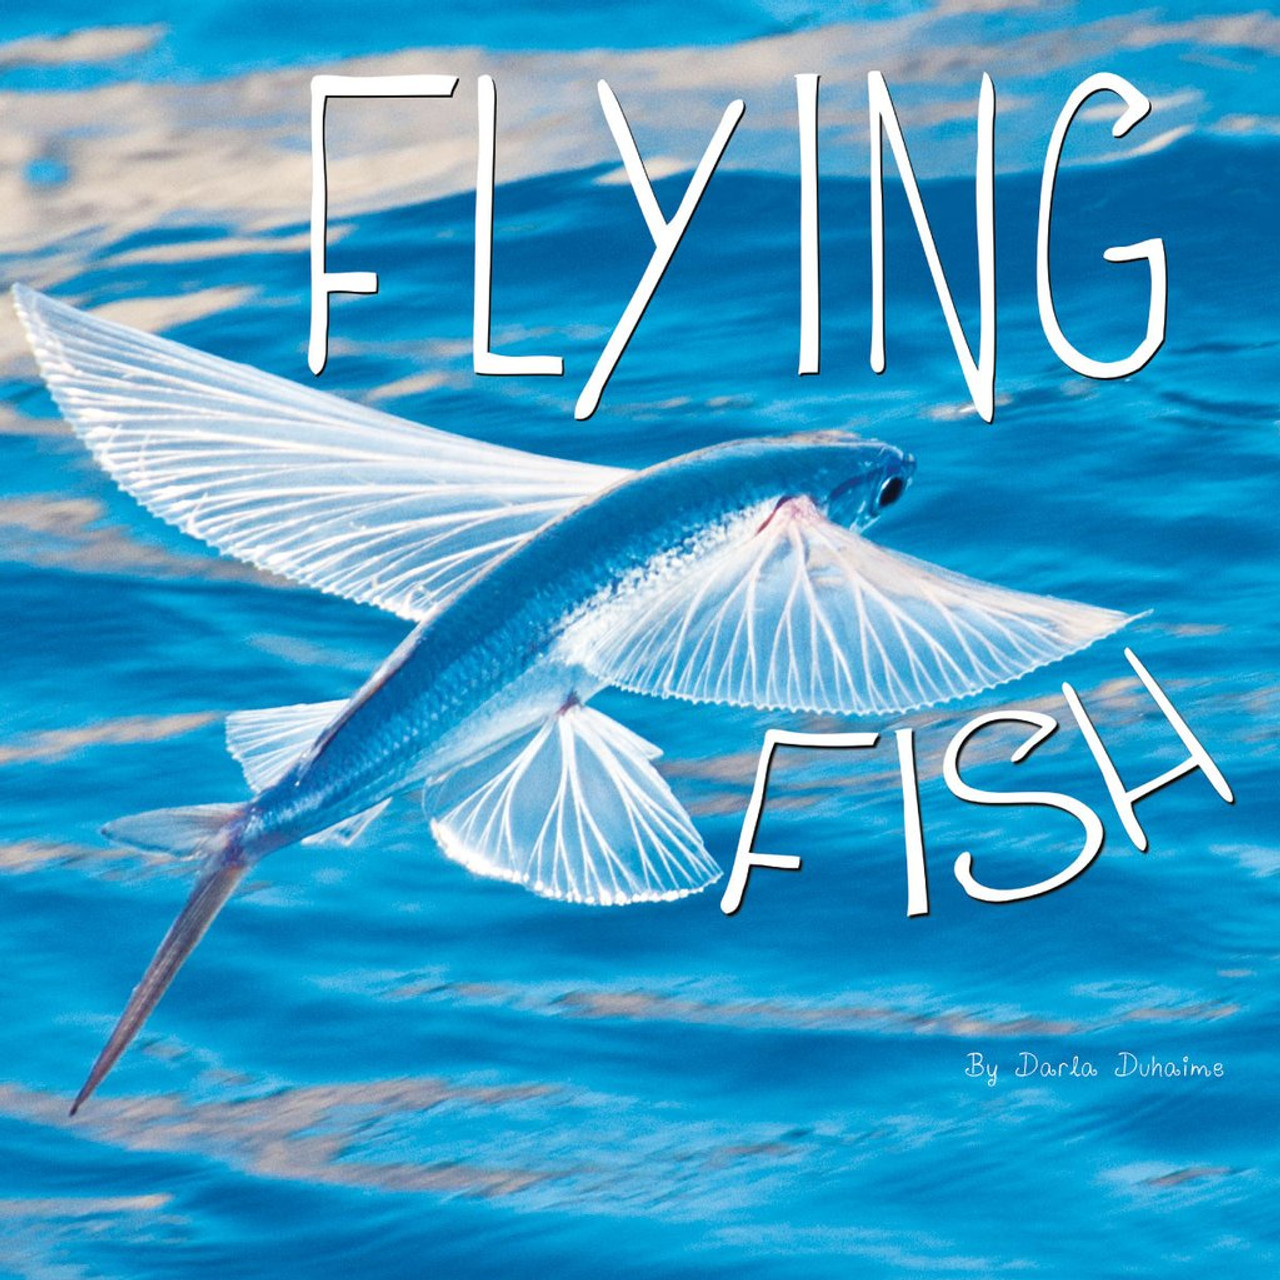 Flying Fish are amazing creatures. They propel out of the water and use their wings to glide through the air! Dive in to learn more about flying fish.